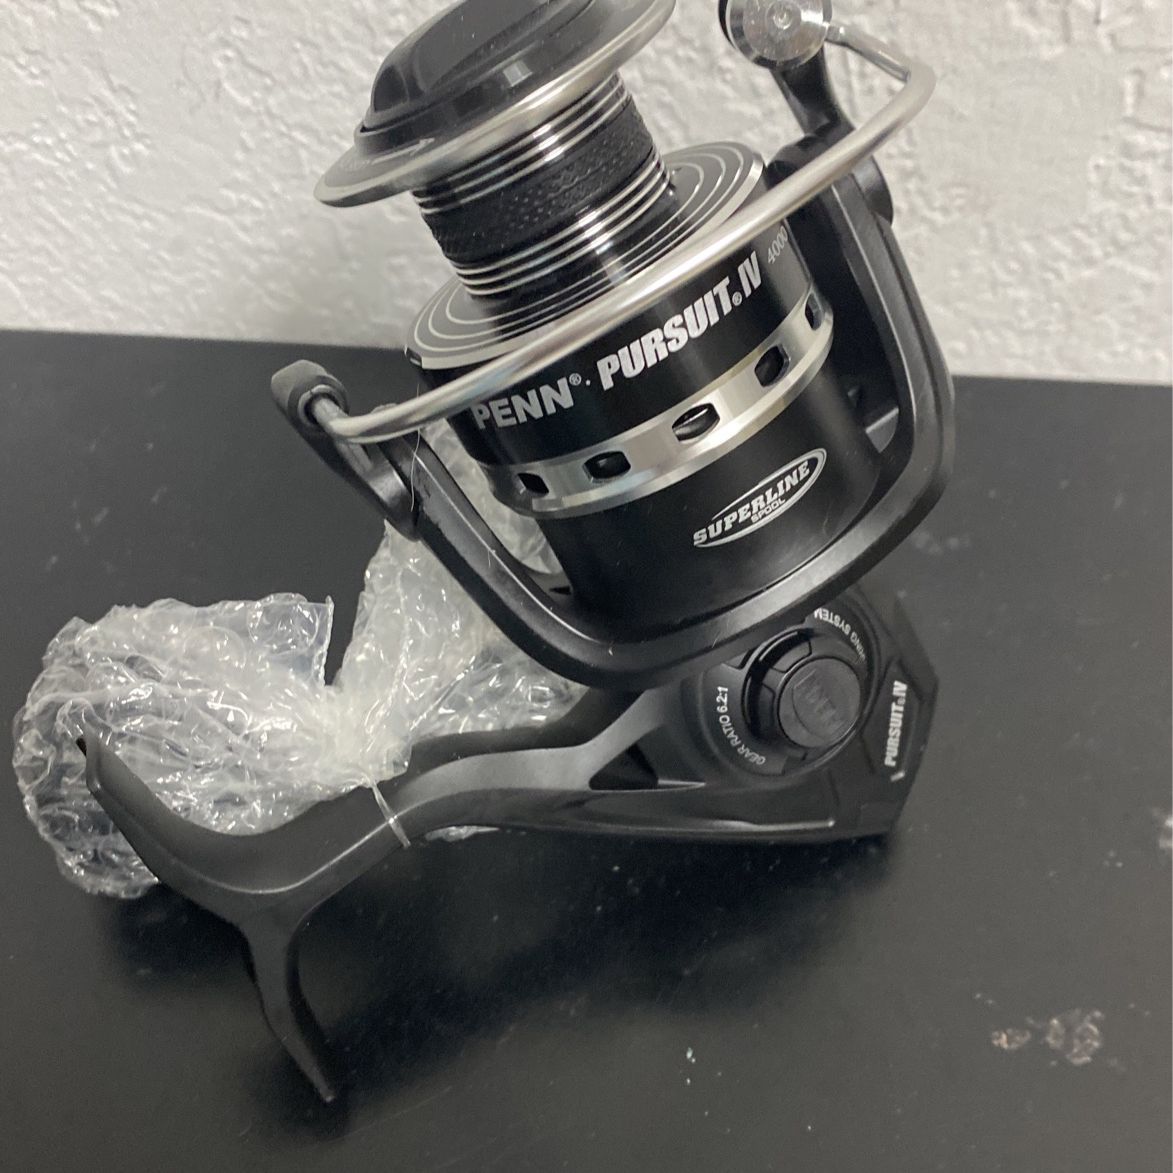 Penn Pursuit IV 4000 Spinning Reel for Sale in Miami, FL - OfferUp